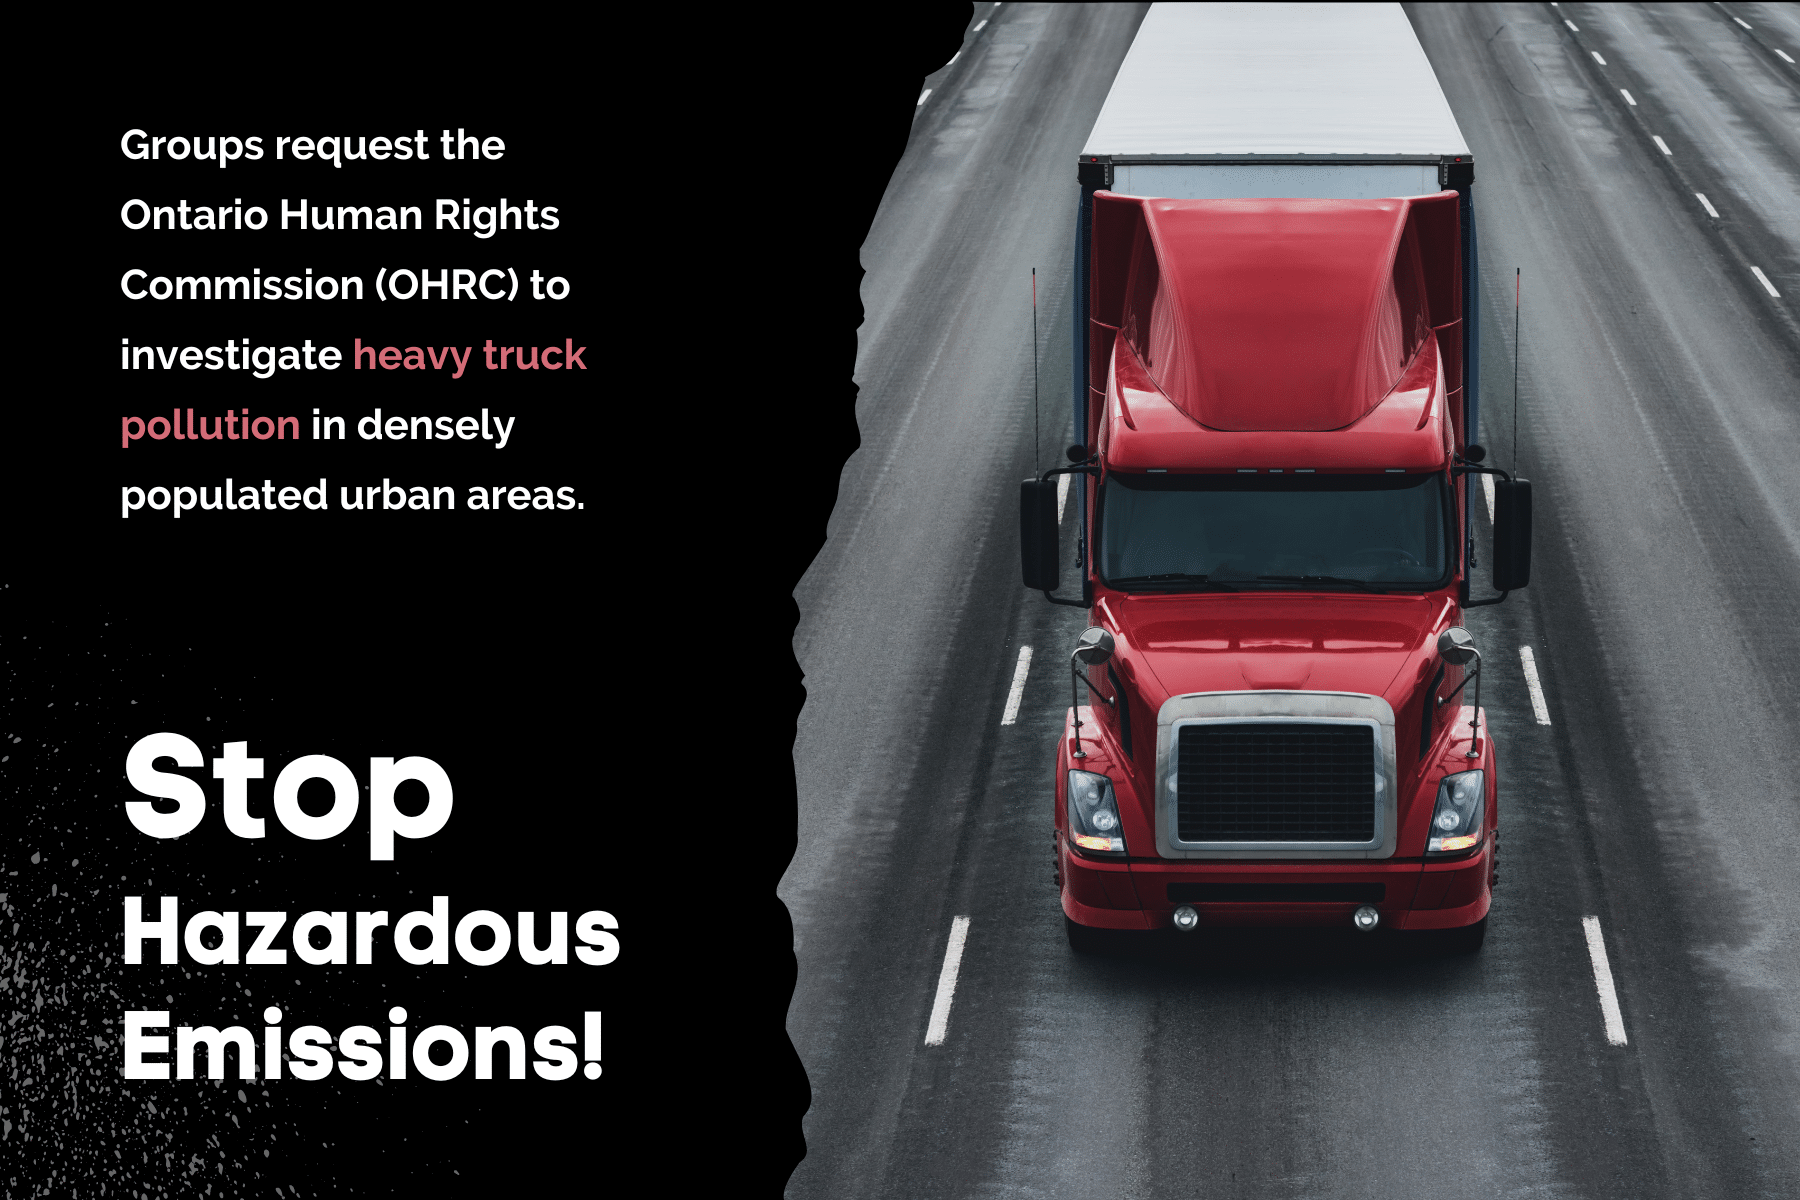 Heavy red truck image torn in half with the words "Groups request the Ontario Human Rights Commission (OHRC) to investigate heavy truck pollution in densely populated urban areas. Stop Hazardous Emissions!" on a black background